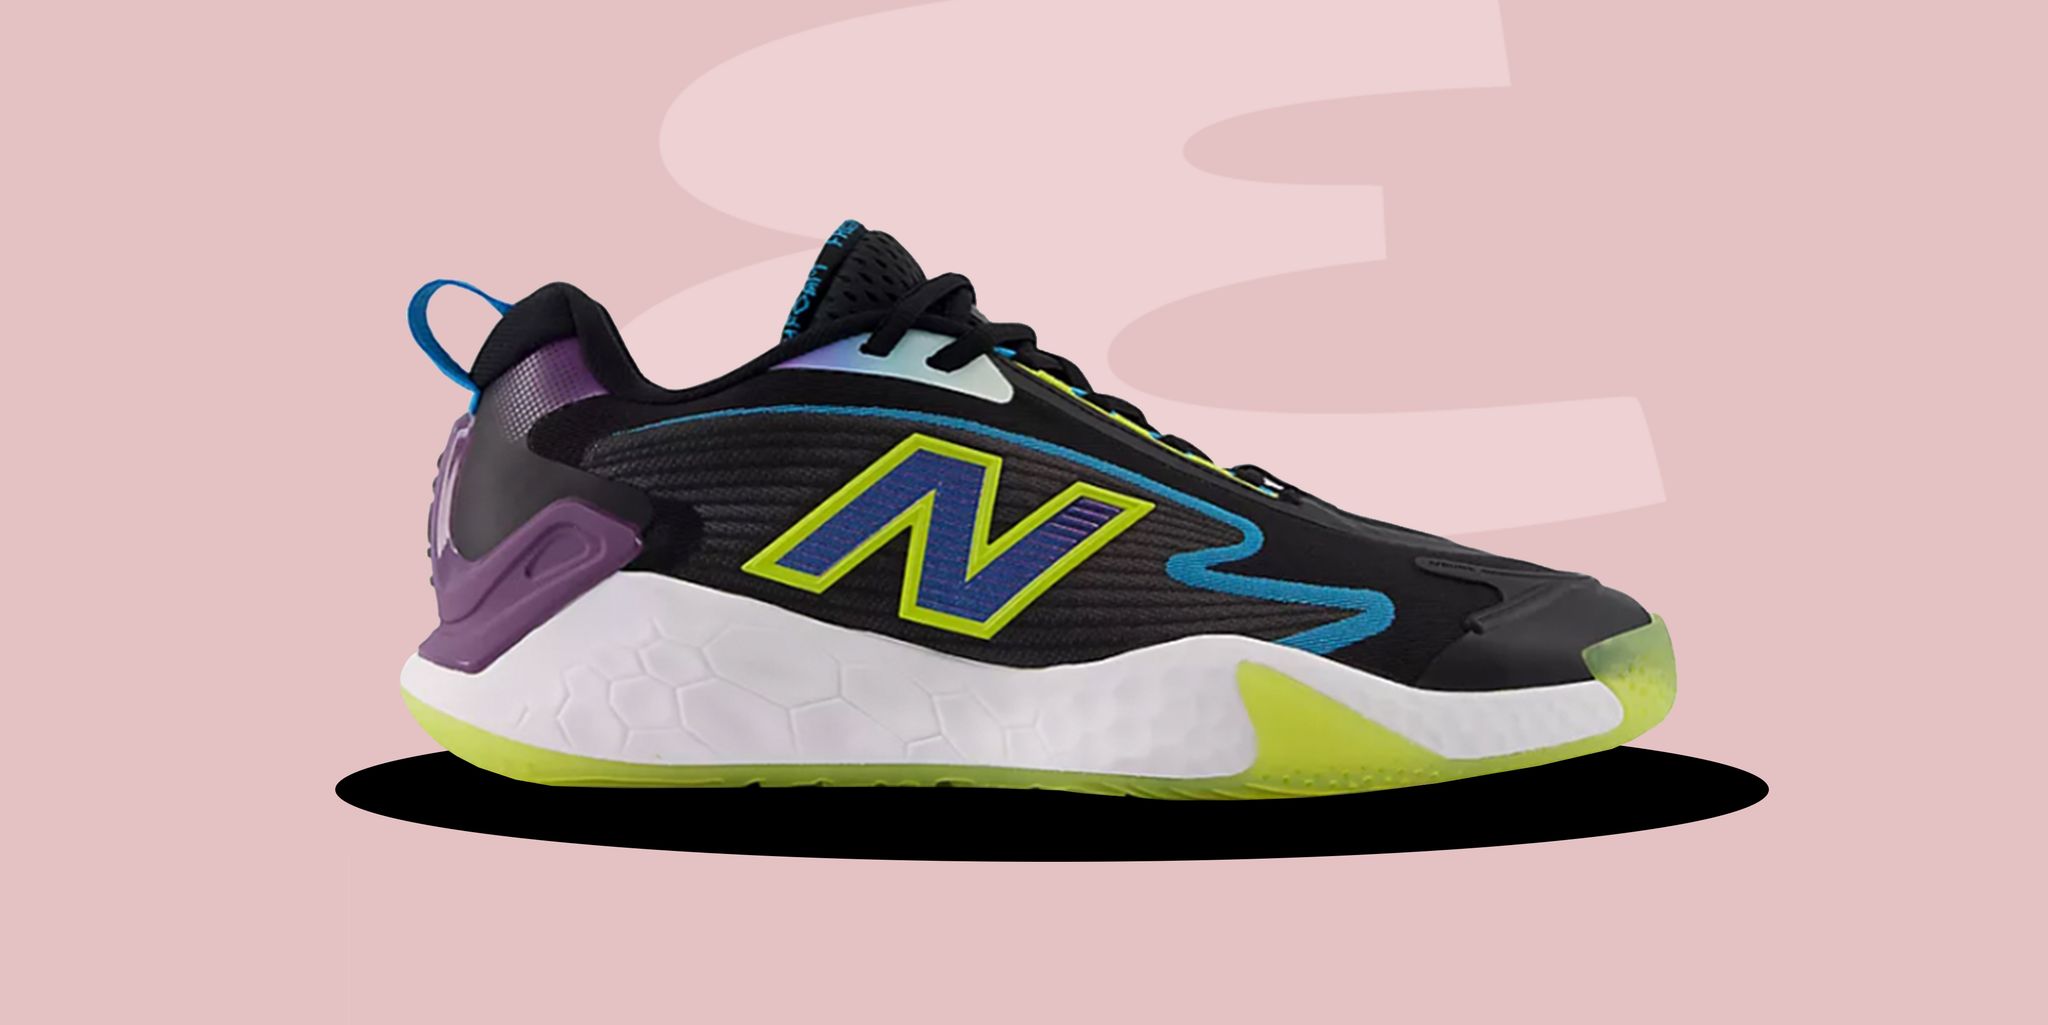 Shop New Balance's May Sale — Take Up to 30% Off